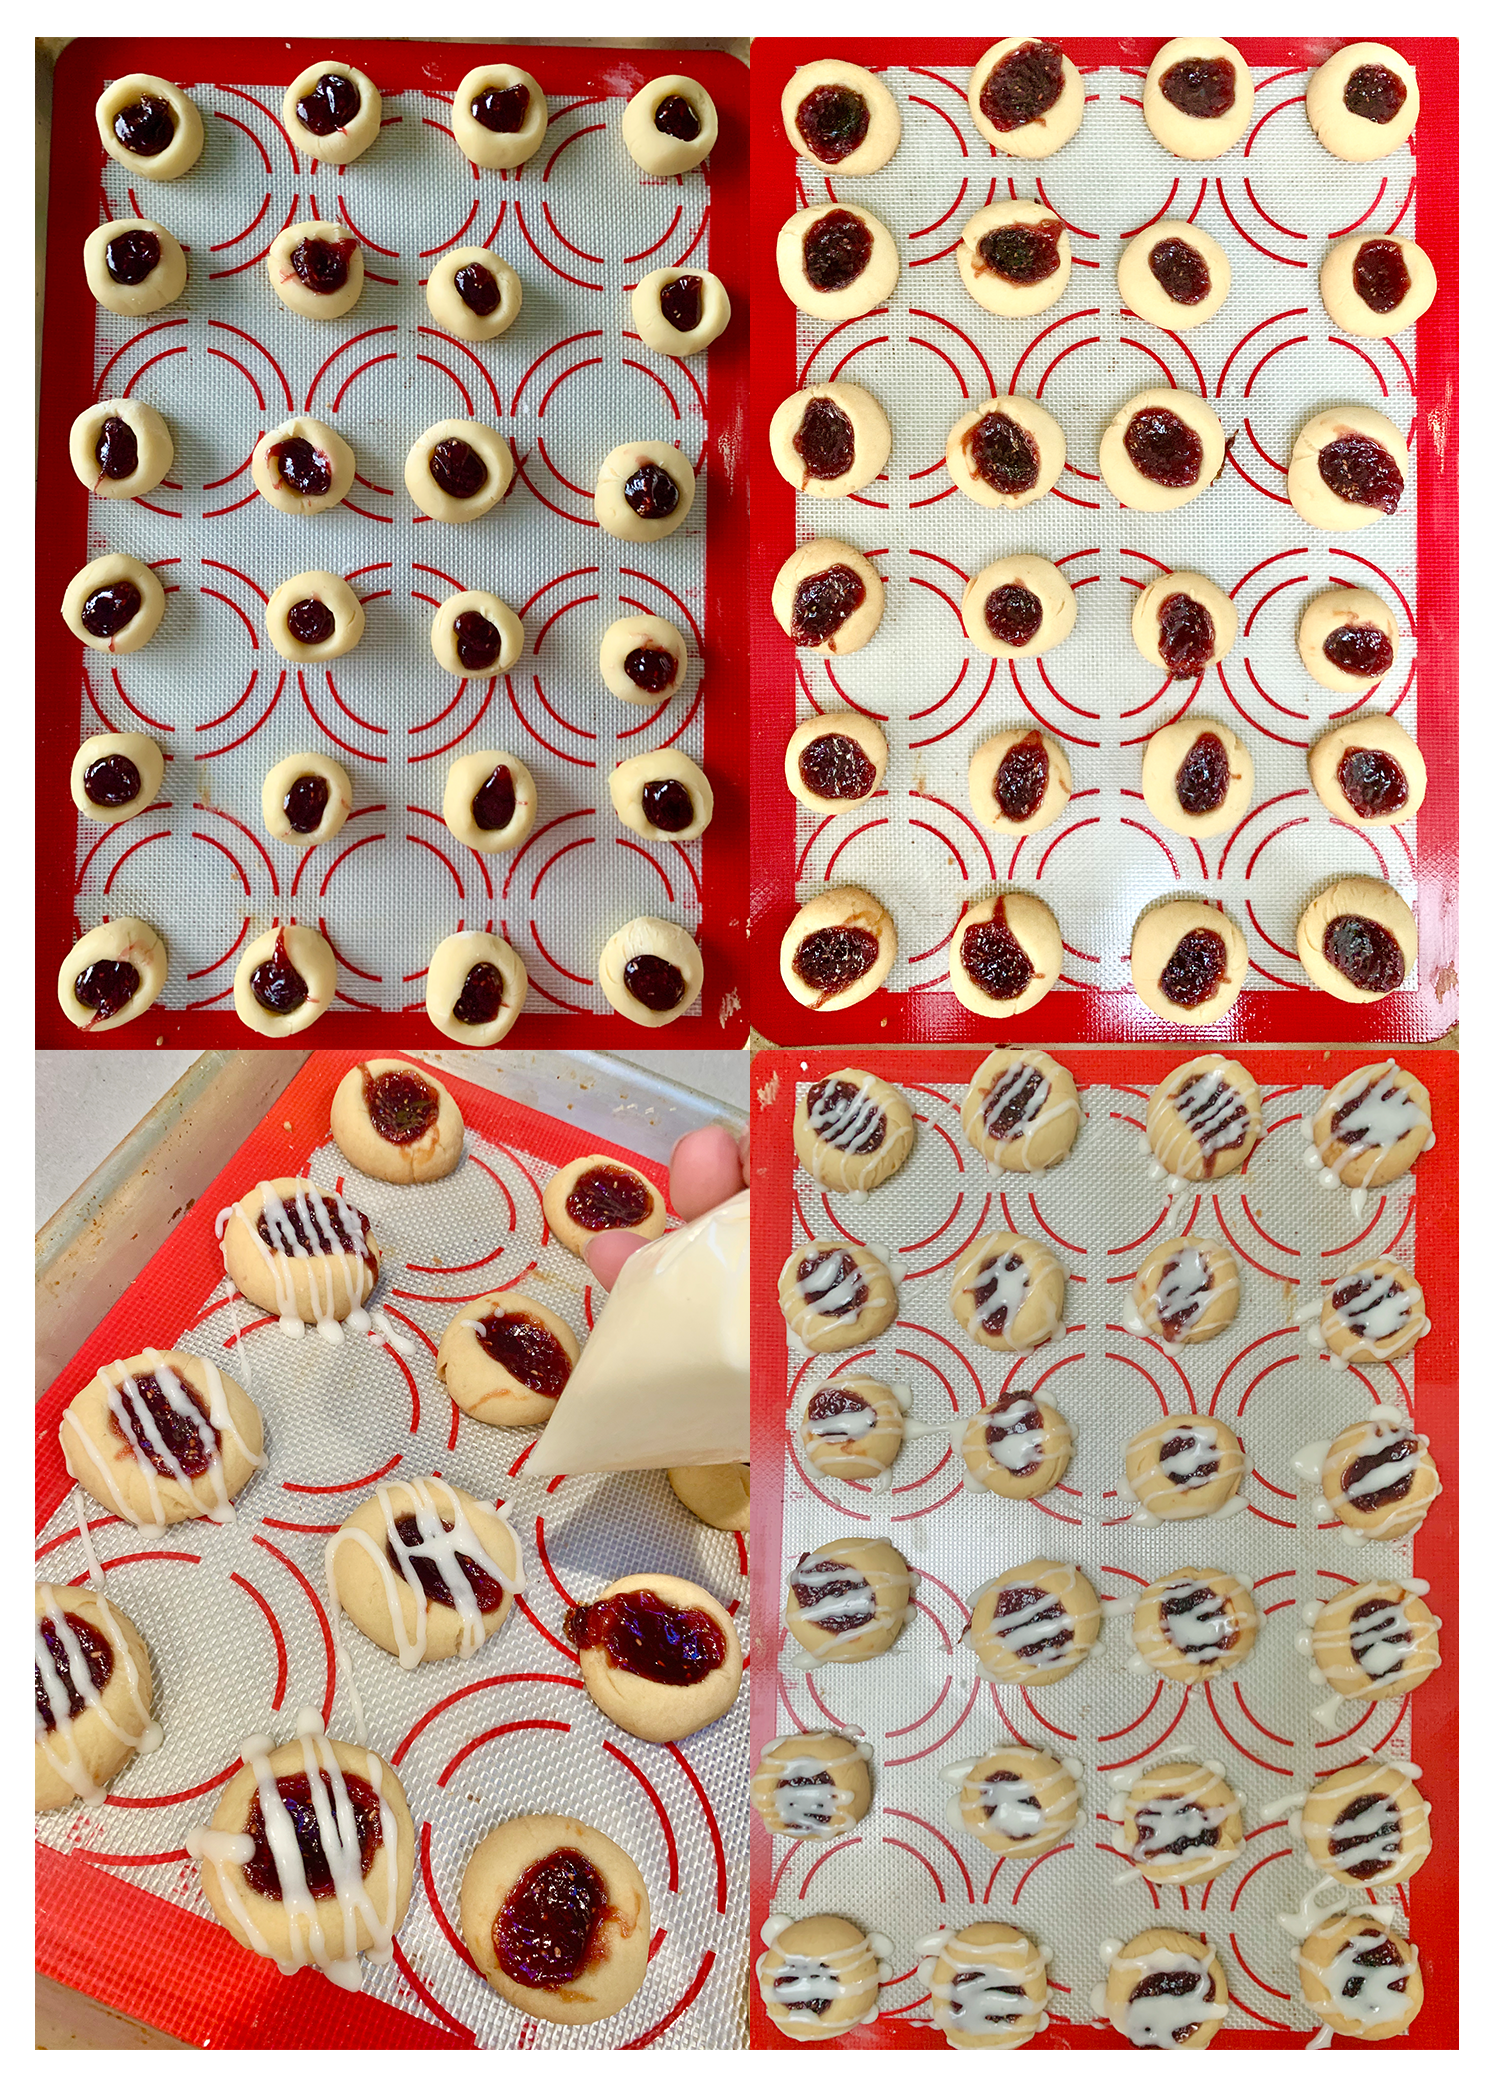 thumbprint cookies with icing